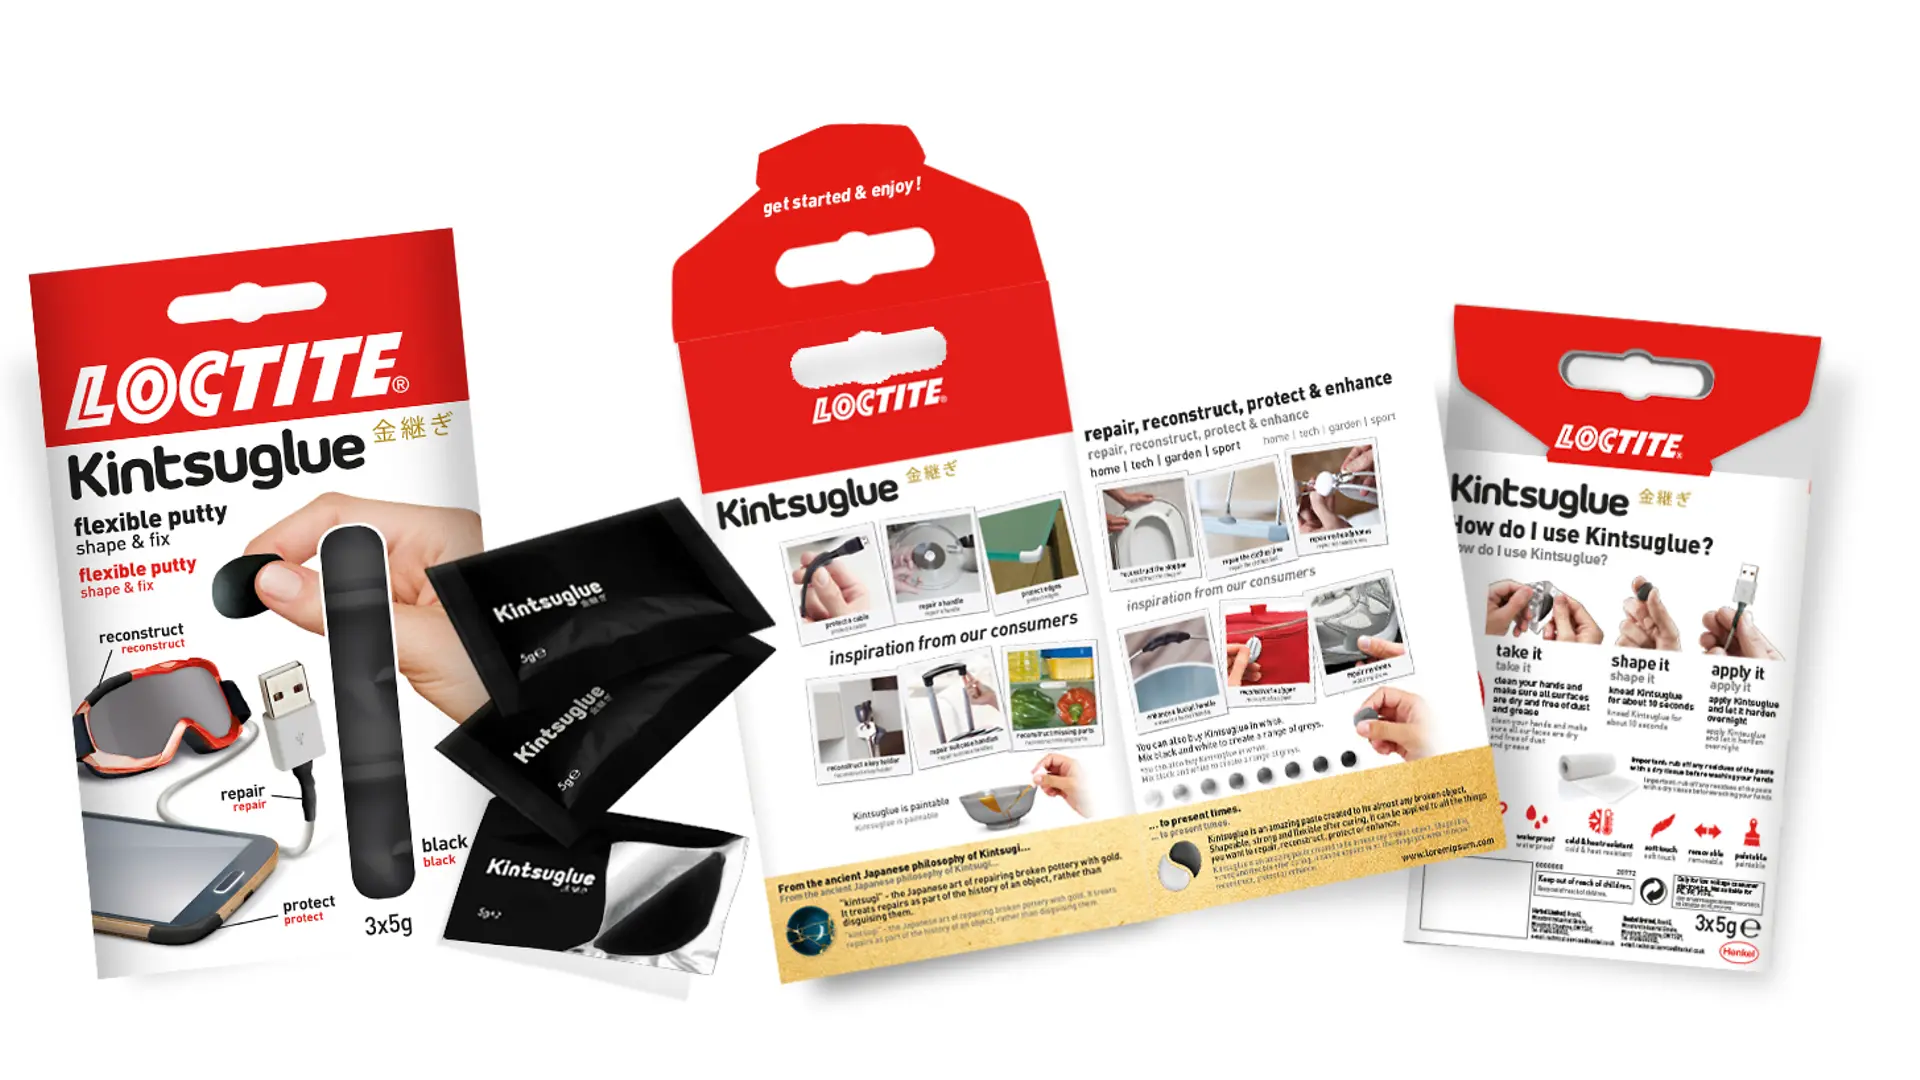 The product pack contains examples of the applications of Kintsuglue and a guide for consumers.